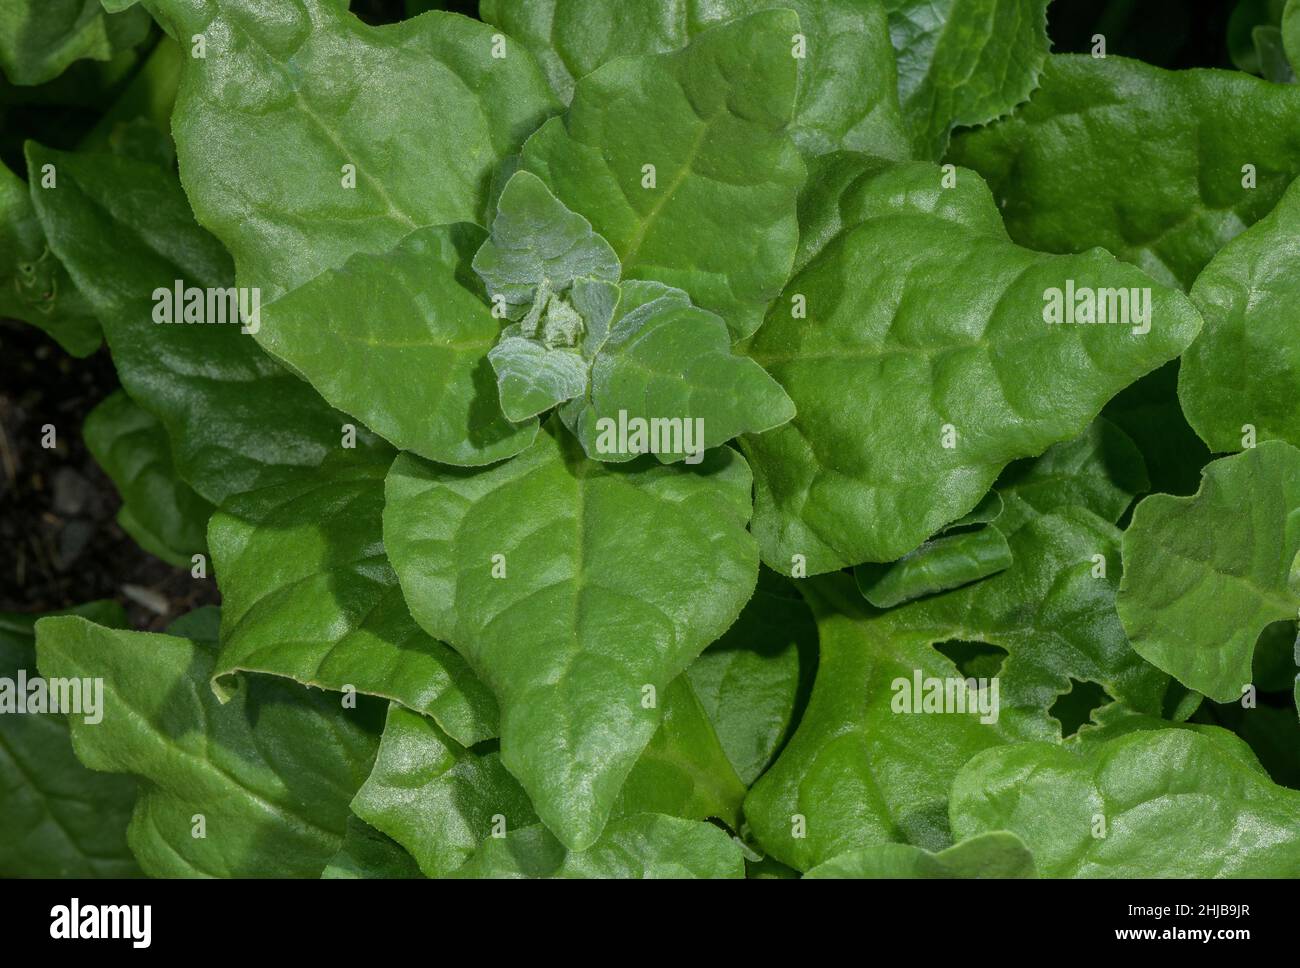 Leaves of New Zealand Spinach, Tetragonia tetragonoides used as vegetable. Stock Photo